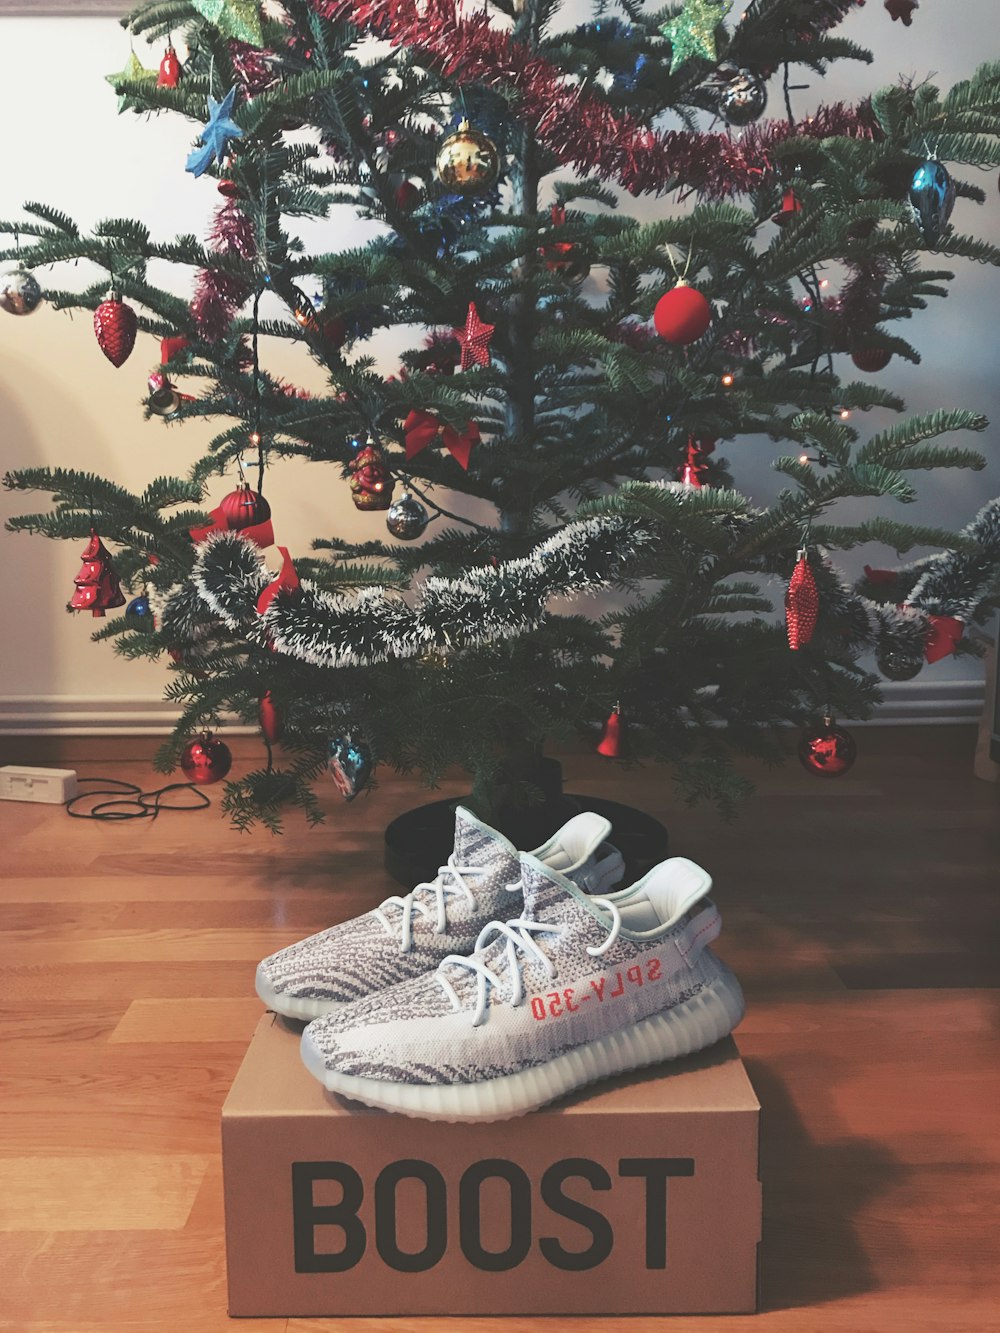 white-and-gray Adidas Yeezy Boost 350 V2 shoes with box